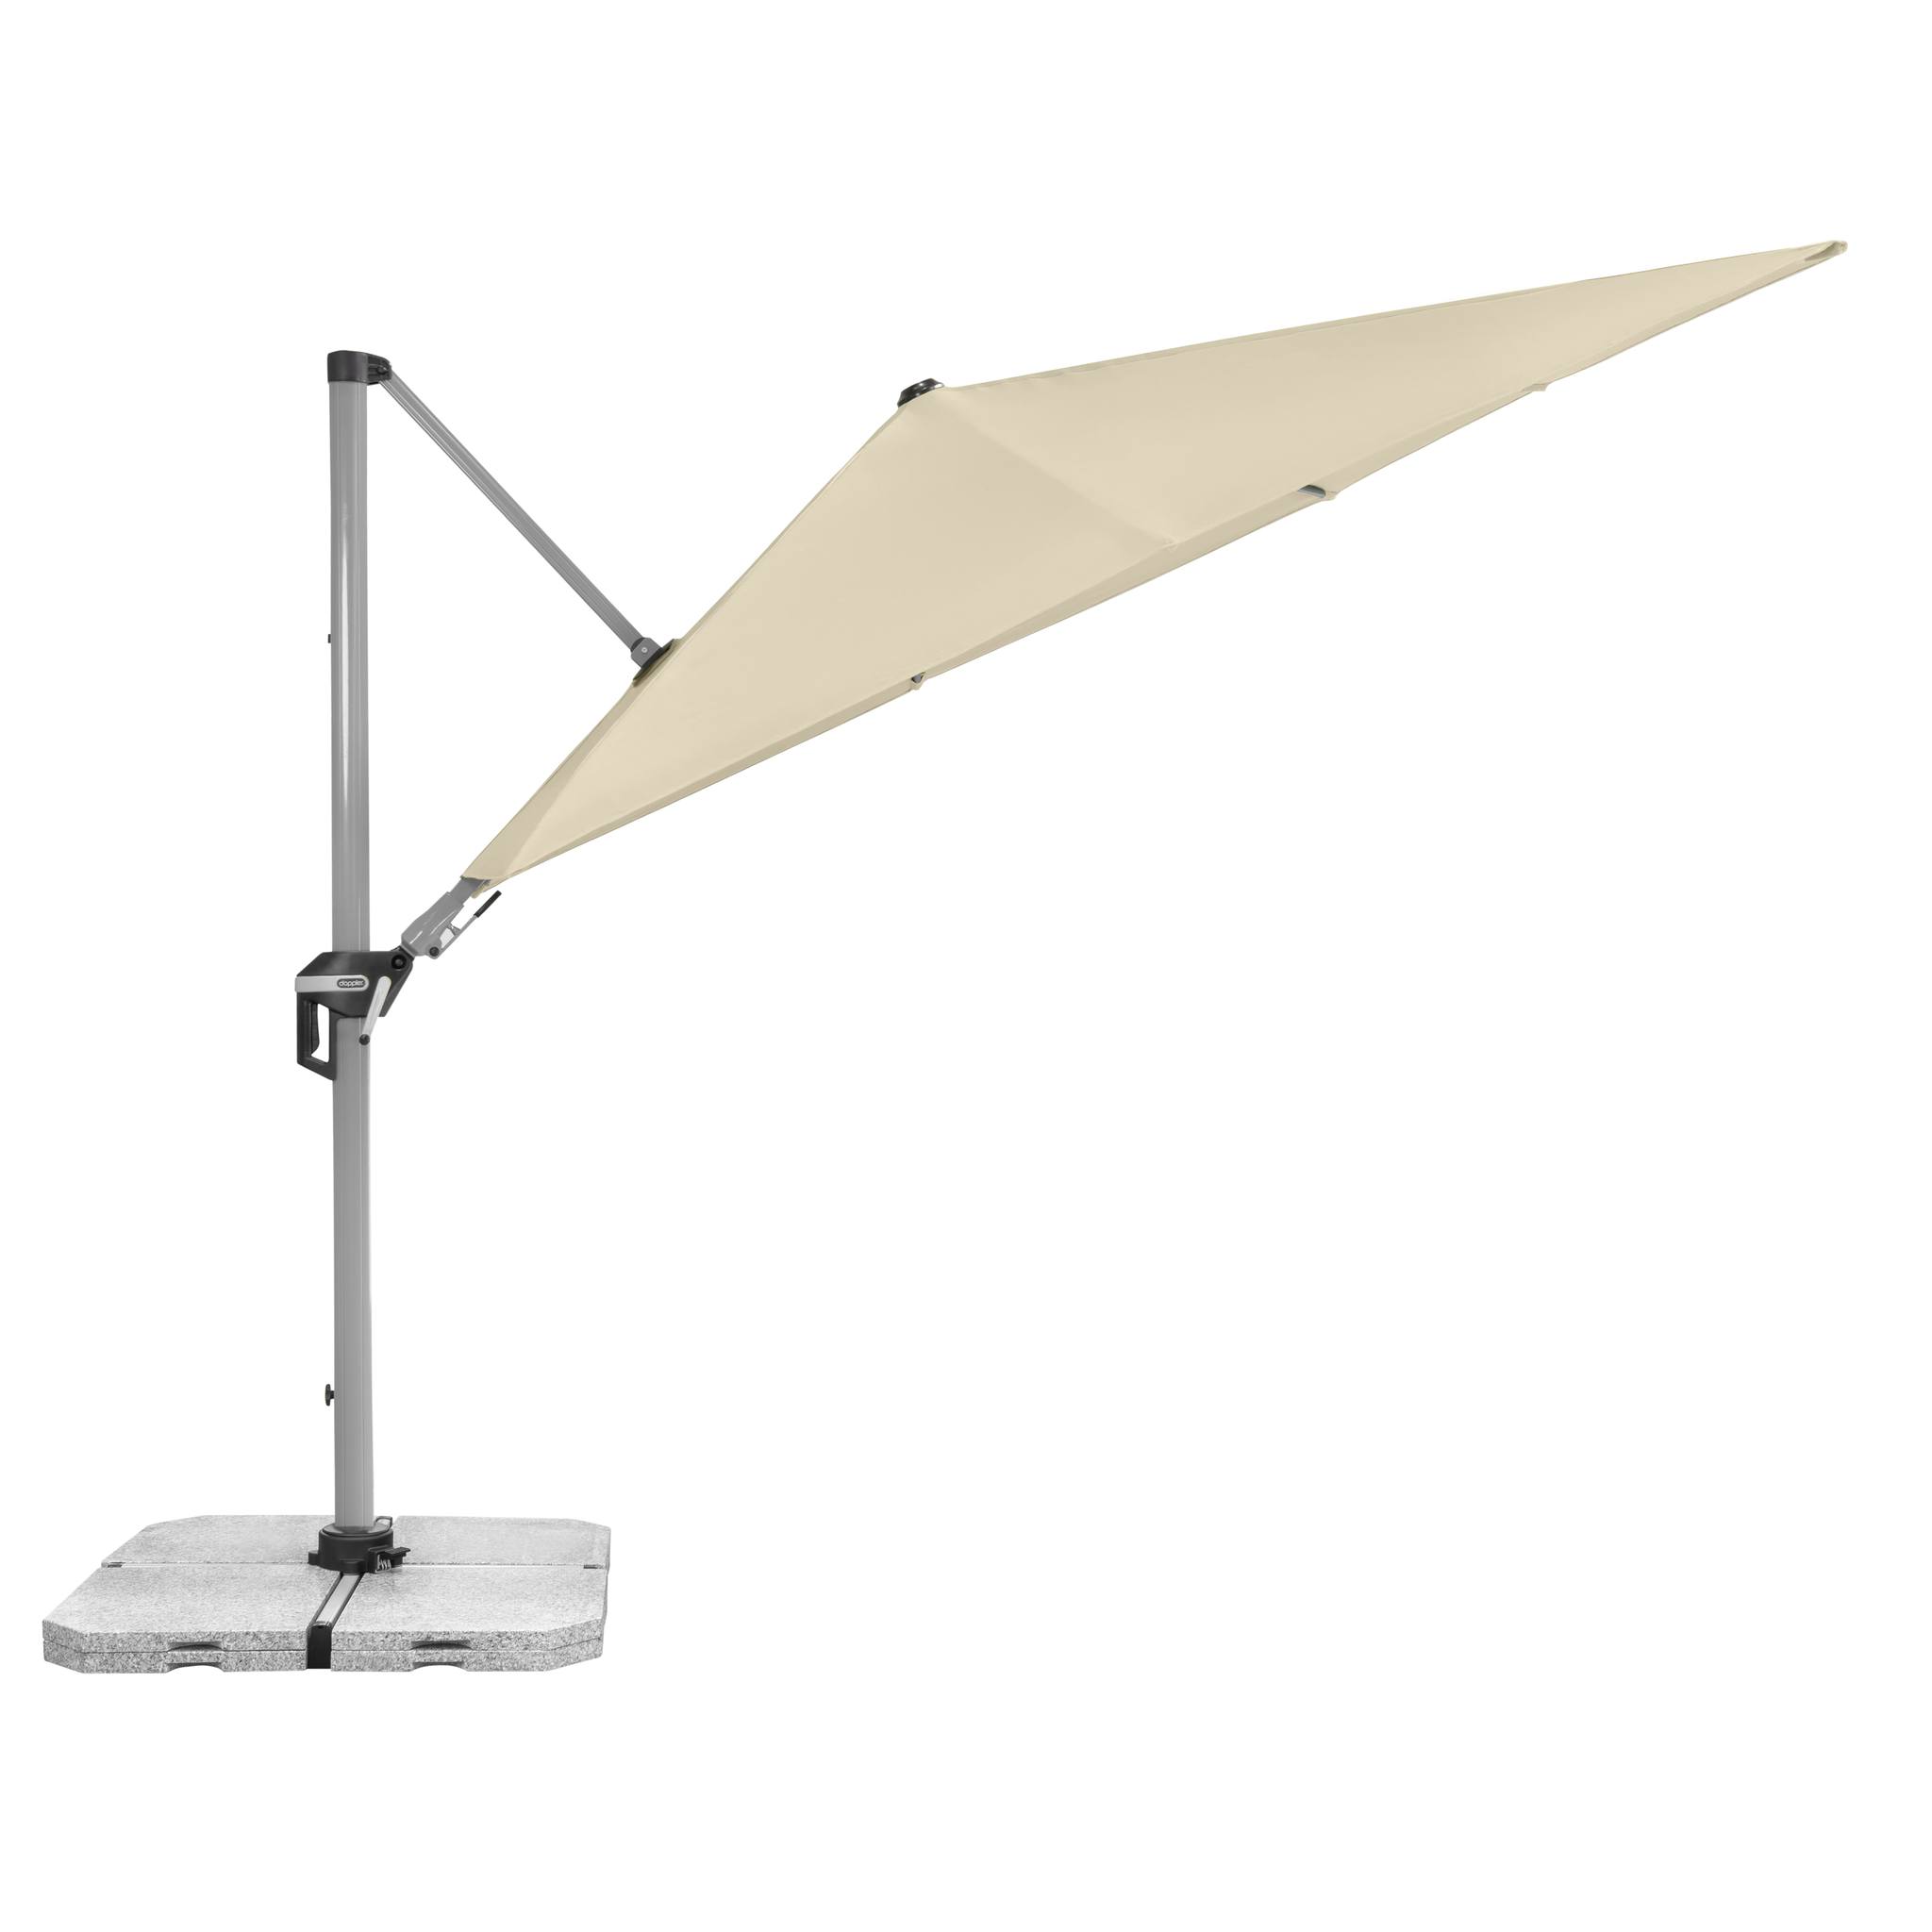 Doppler Active 360 x 260cm cantilever parasol

Available colours: Ecru, Fresh Green and Greige

Discover this multi-func... » Outdoor Furniture Fuengirola, Costa Del Sol, Spain